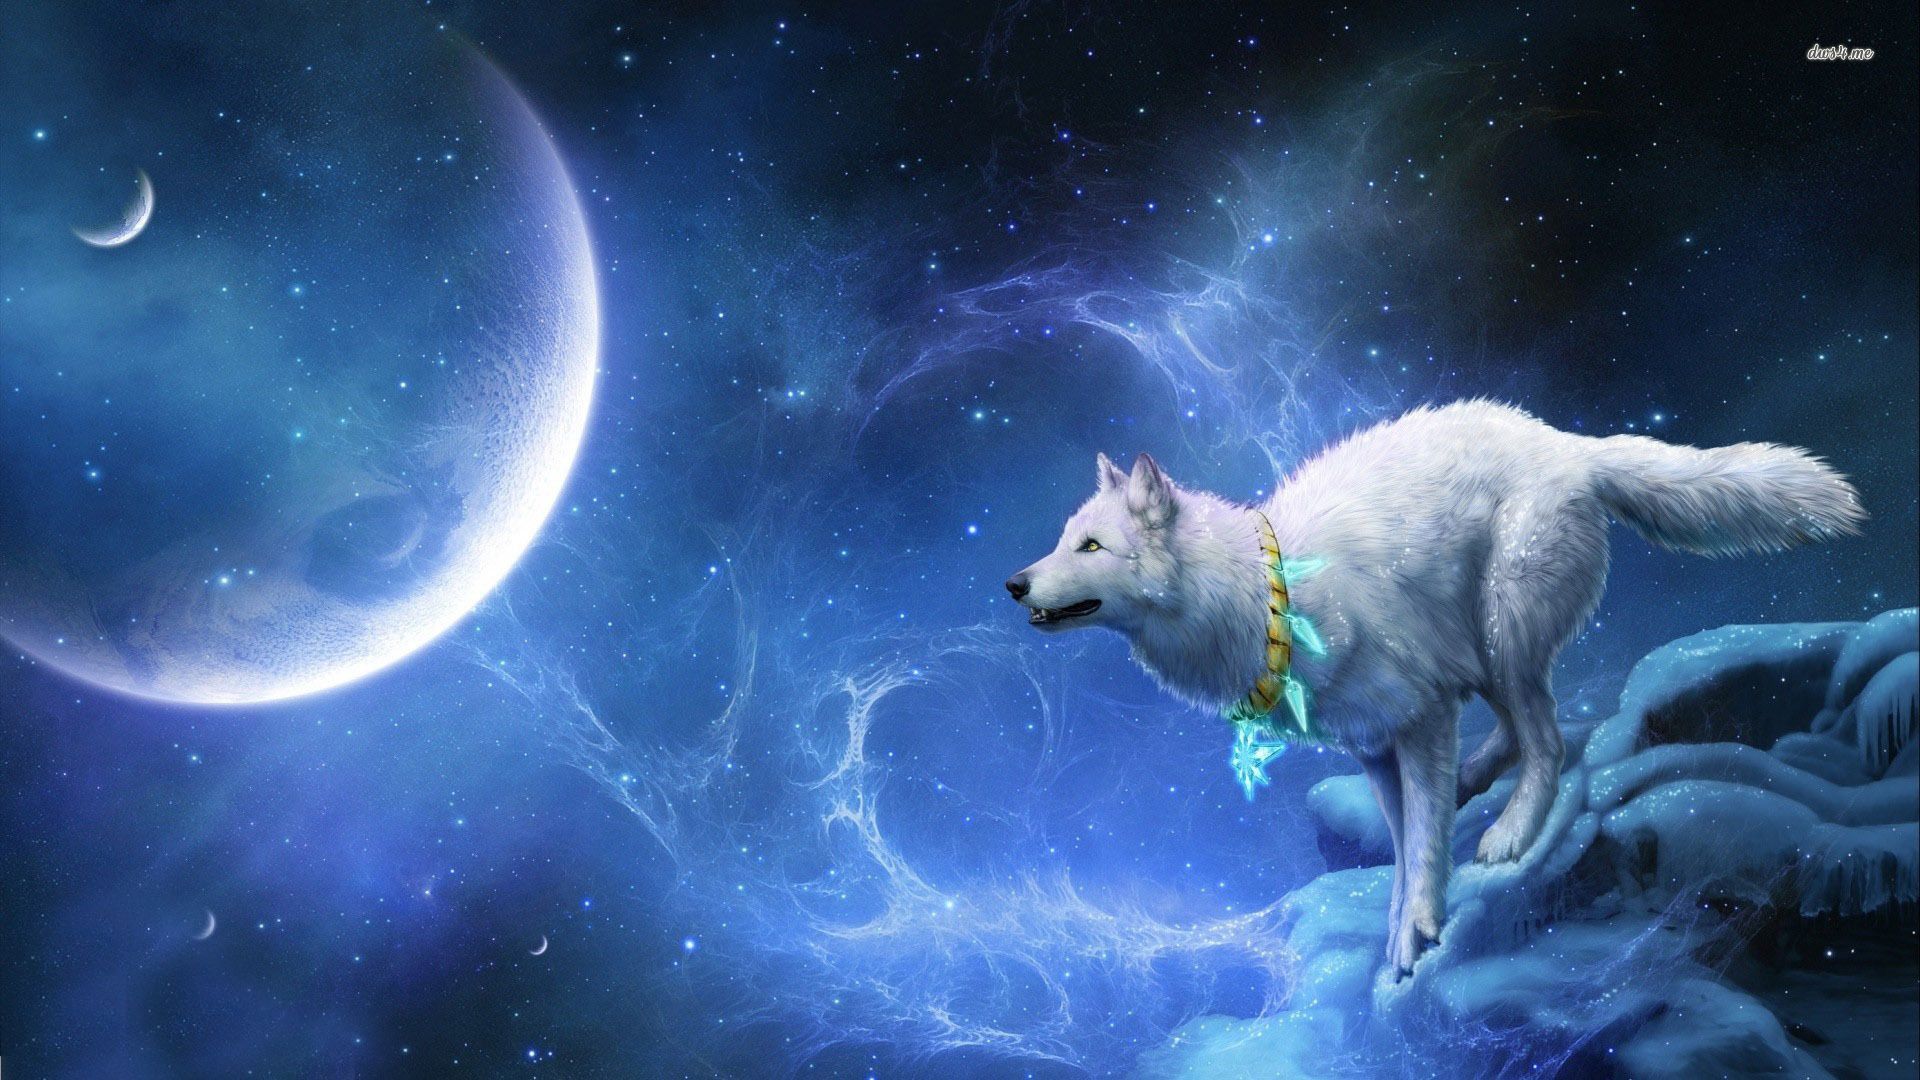 Galaxy wolf wallpaper by VengenceWolf  Download on ZEDGE  7508